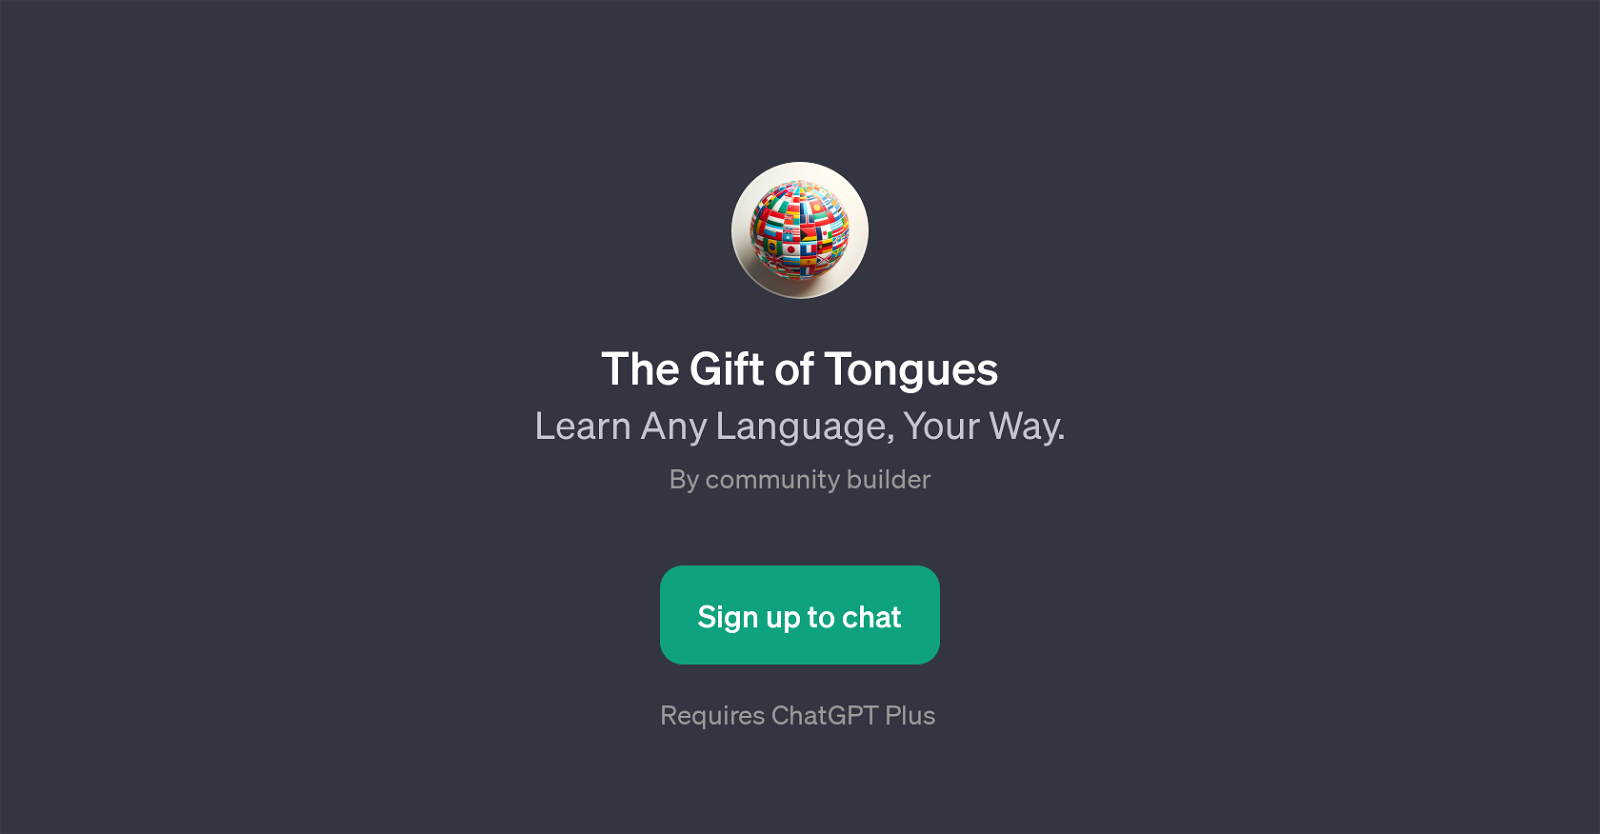 The Gift of Tongues website